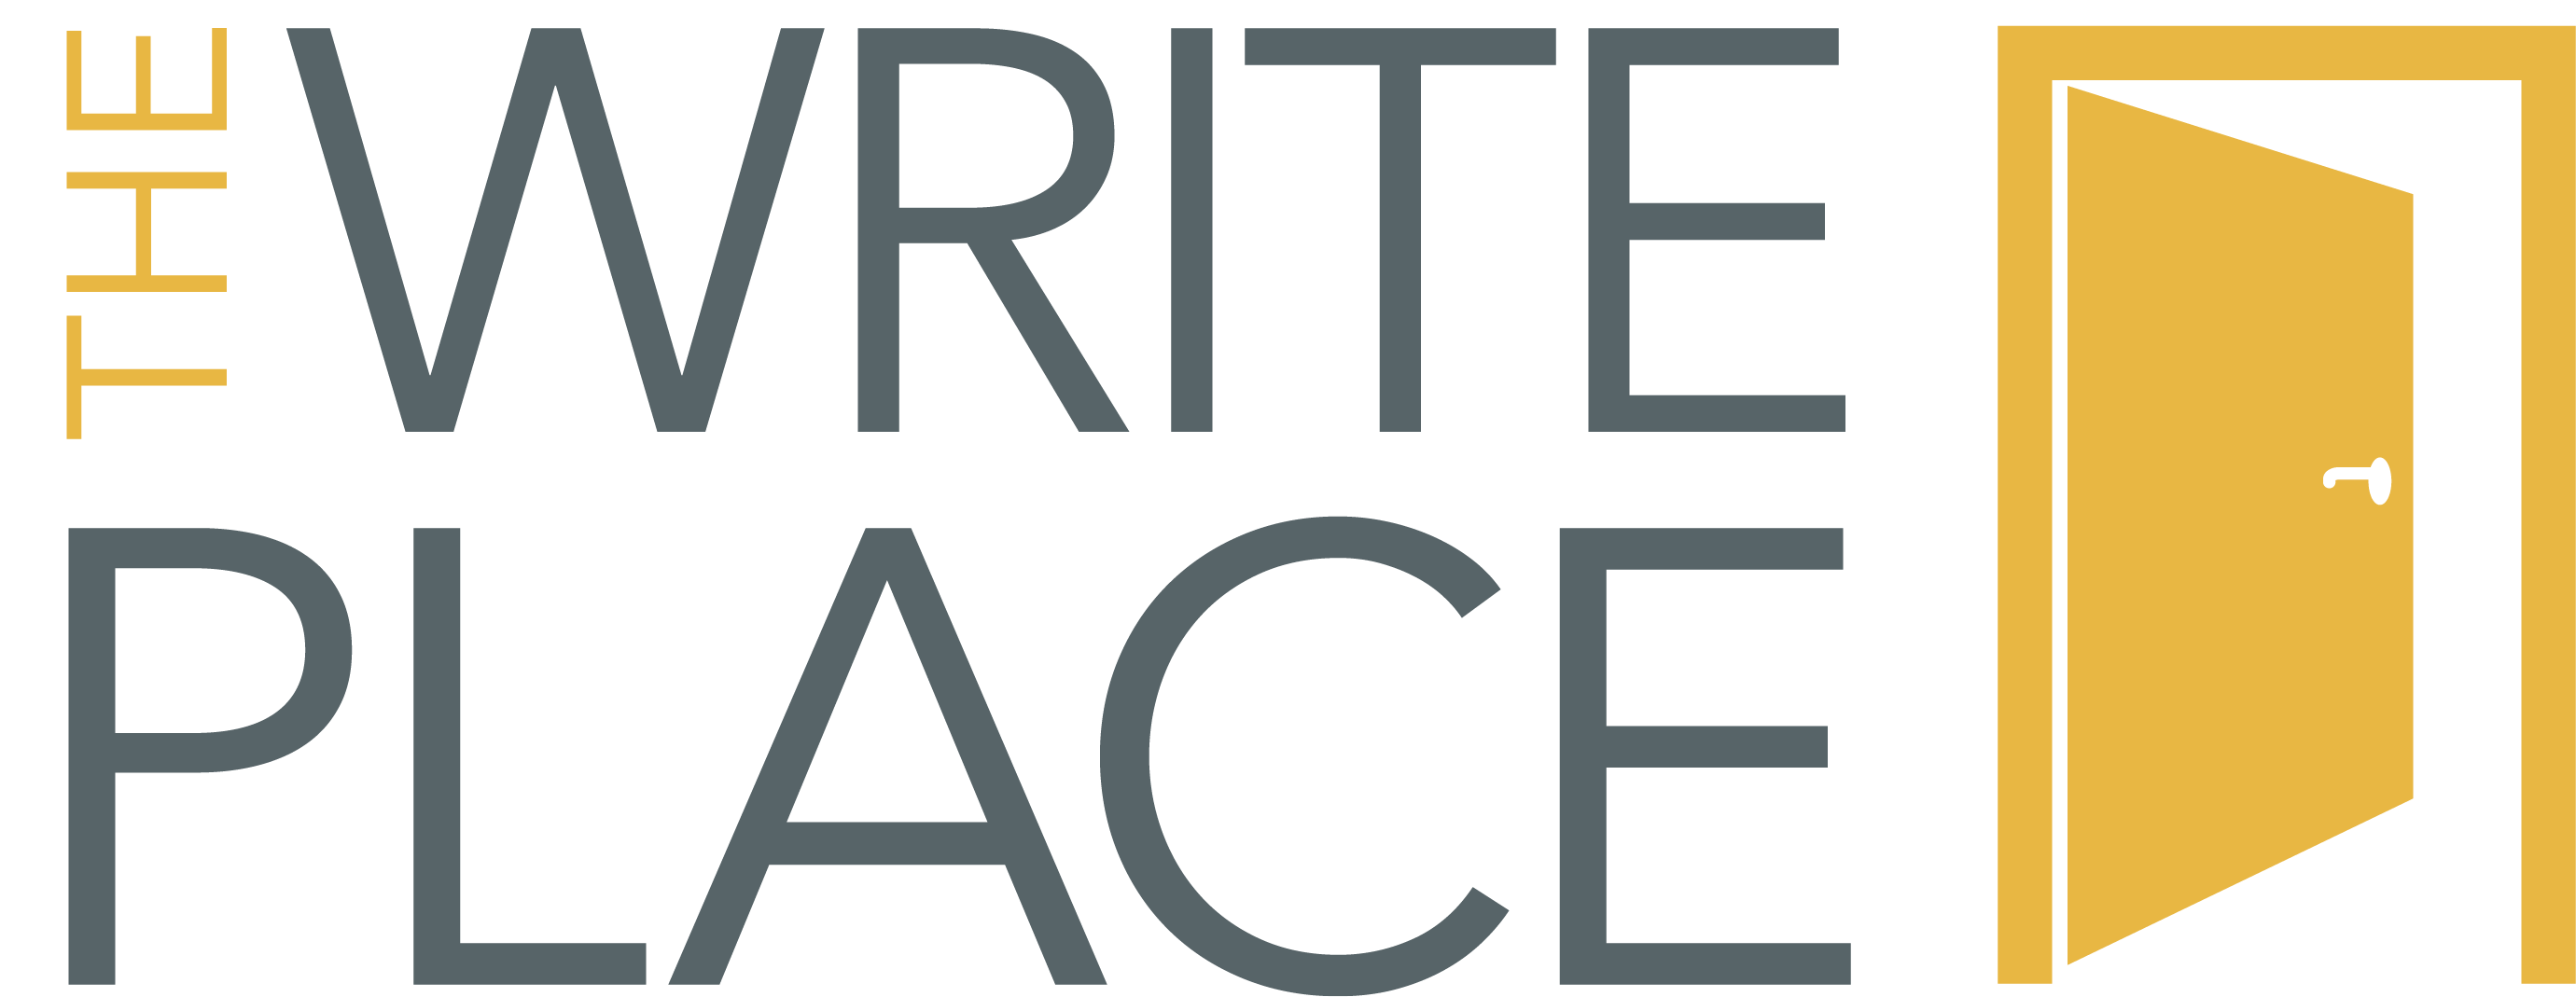 The Write Place logo with an opening yellow door